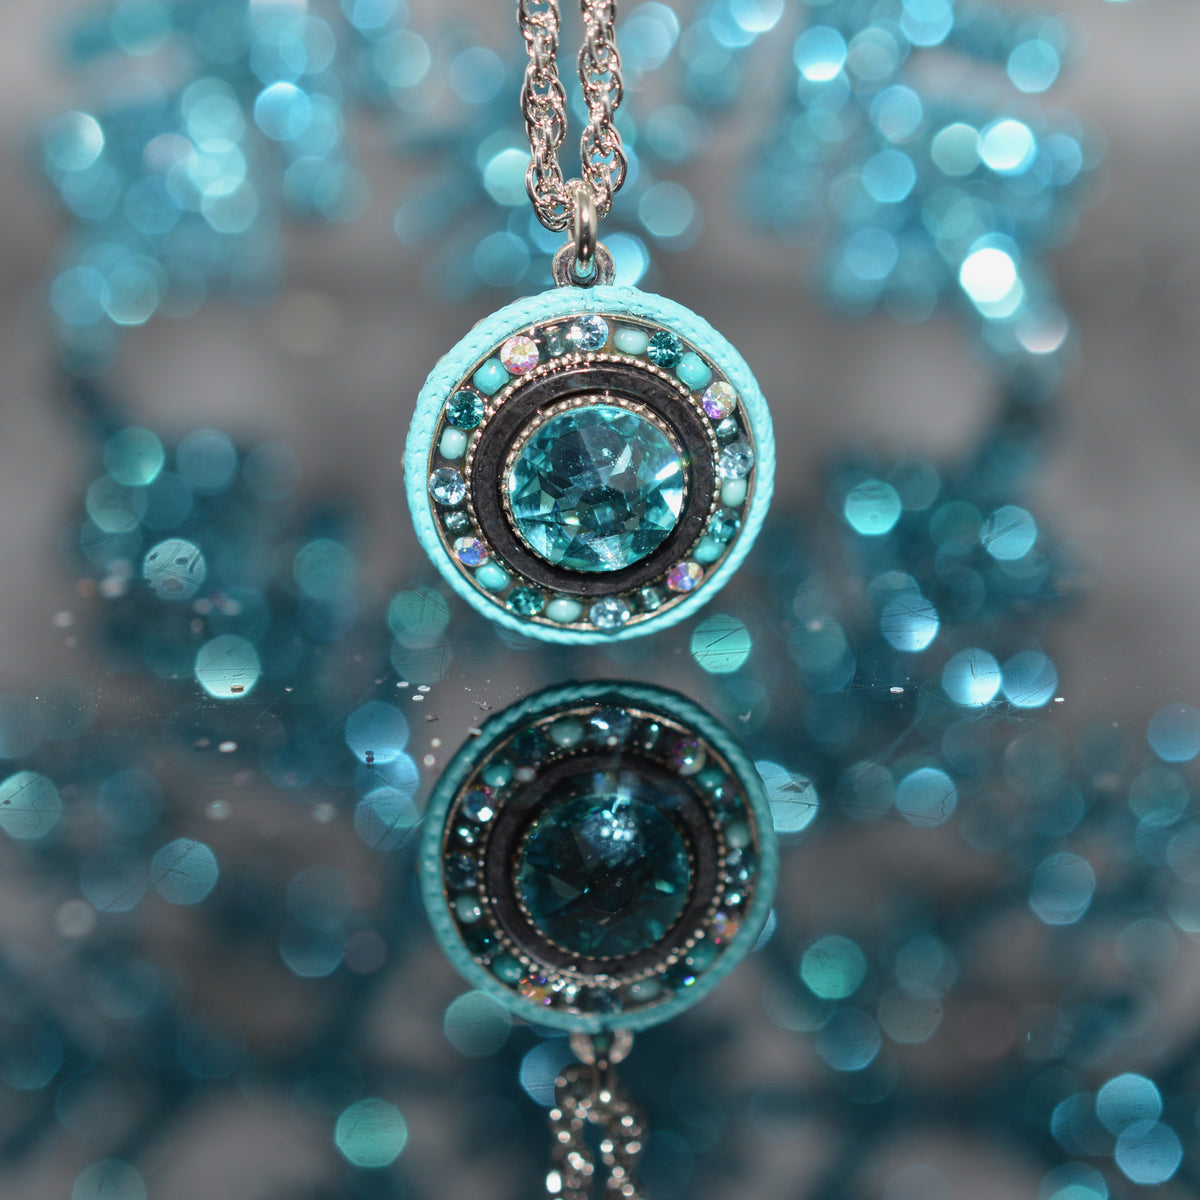 Antique Silver Plated Round Turquoise Crystal Pendant by Firefly